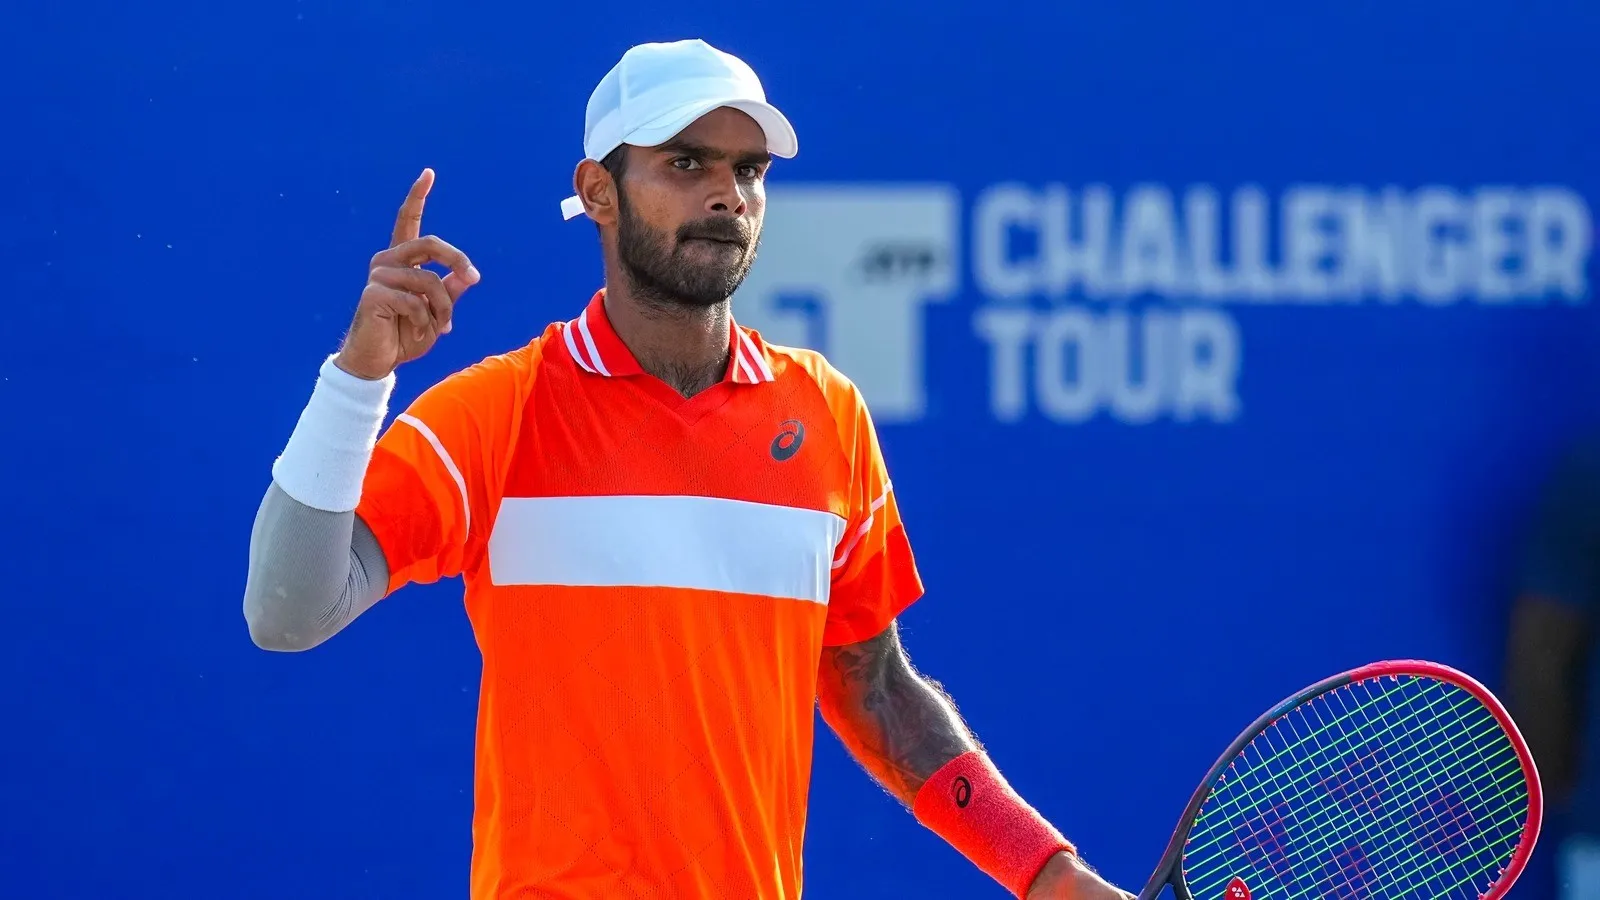 Sumit Nagal wins at Miami Open on debut. Image- Hindustan Times  